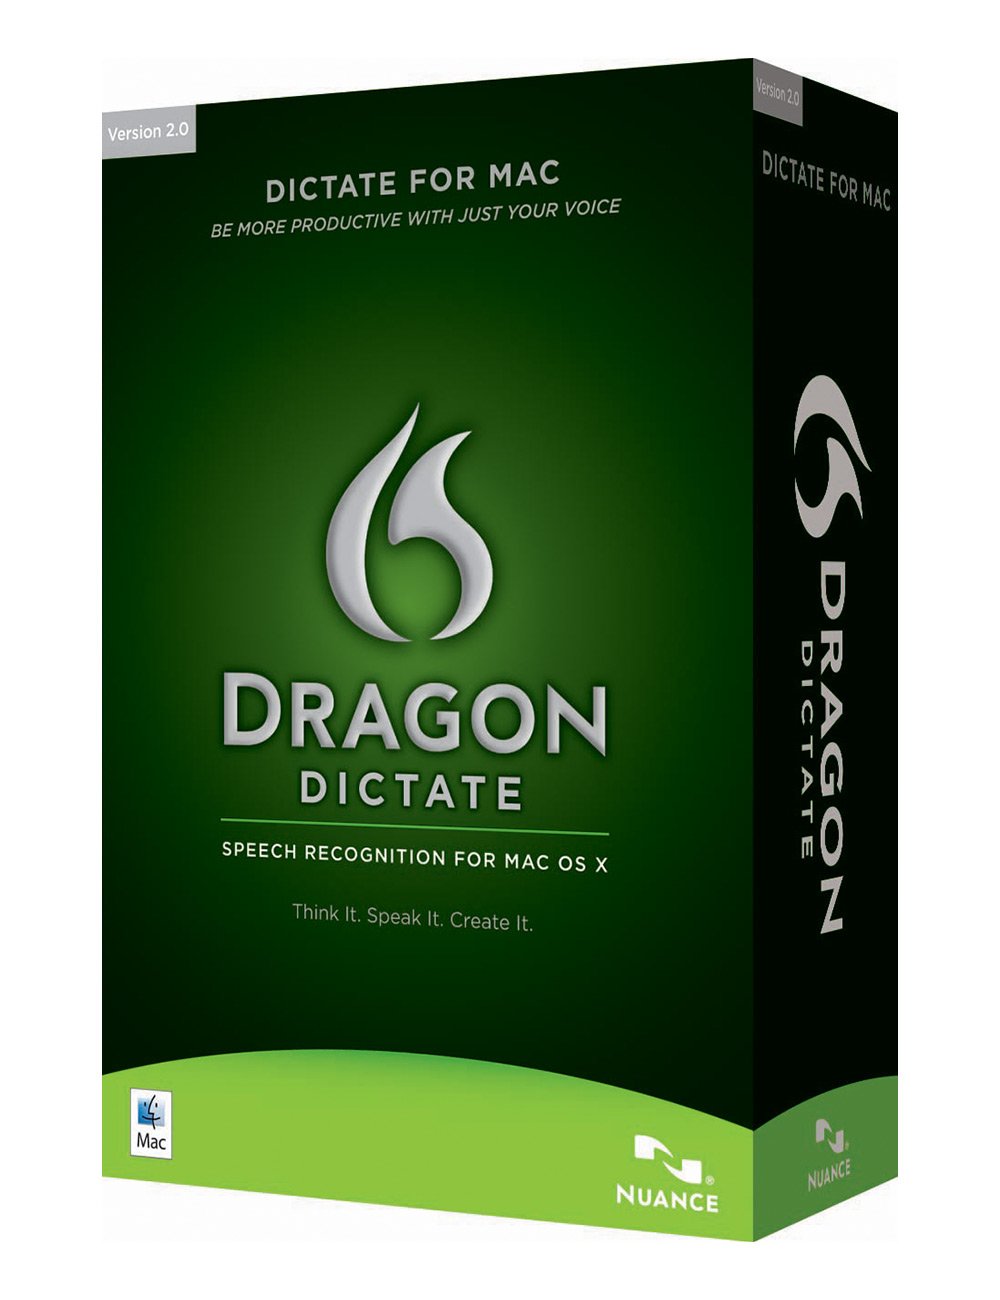 Dragon dictation for mac review